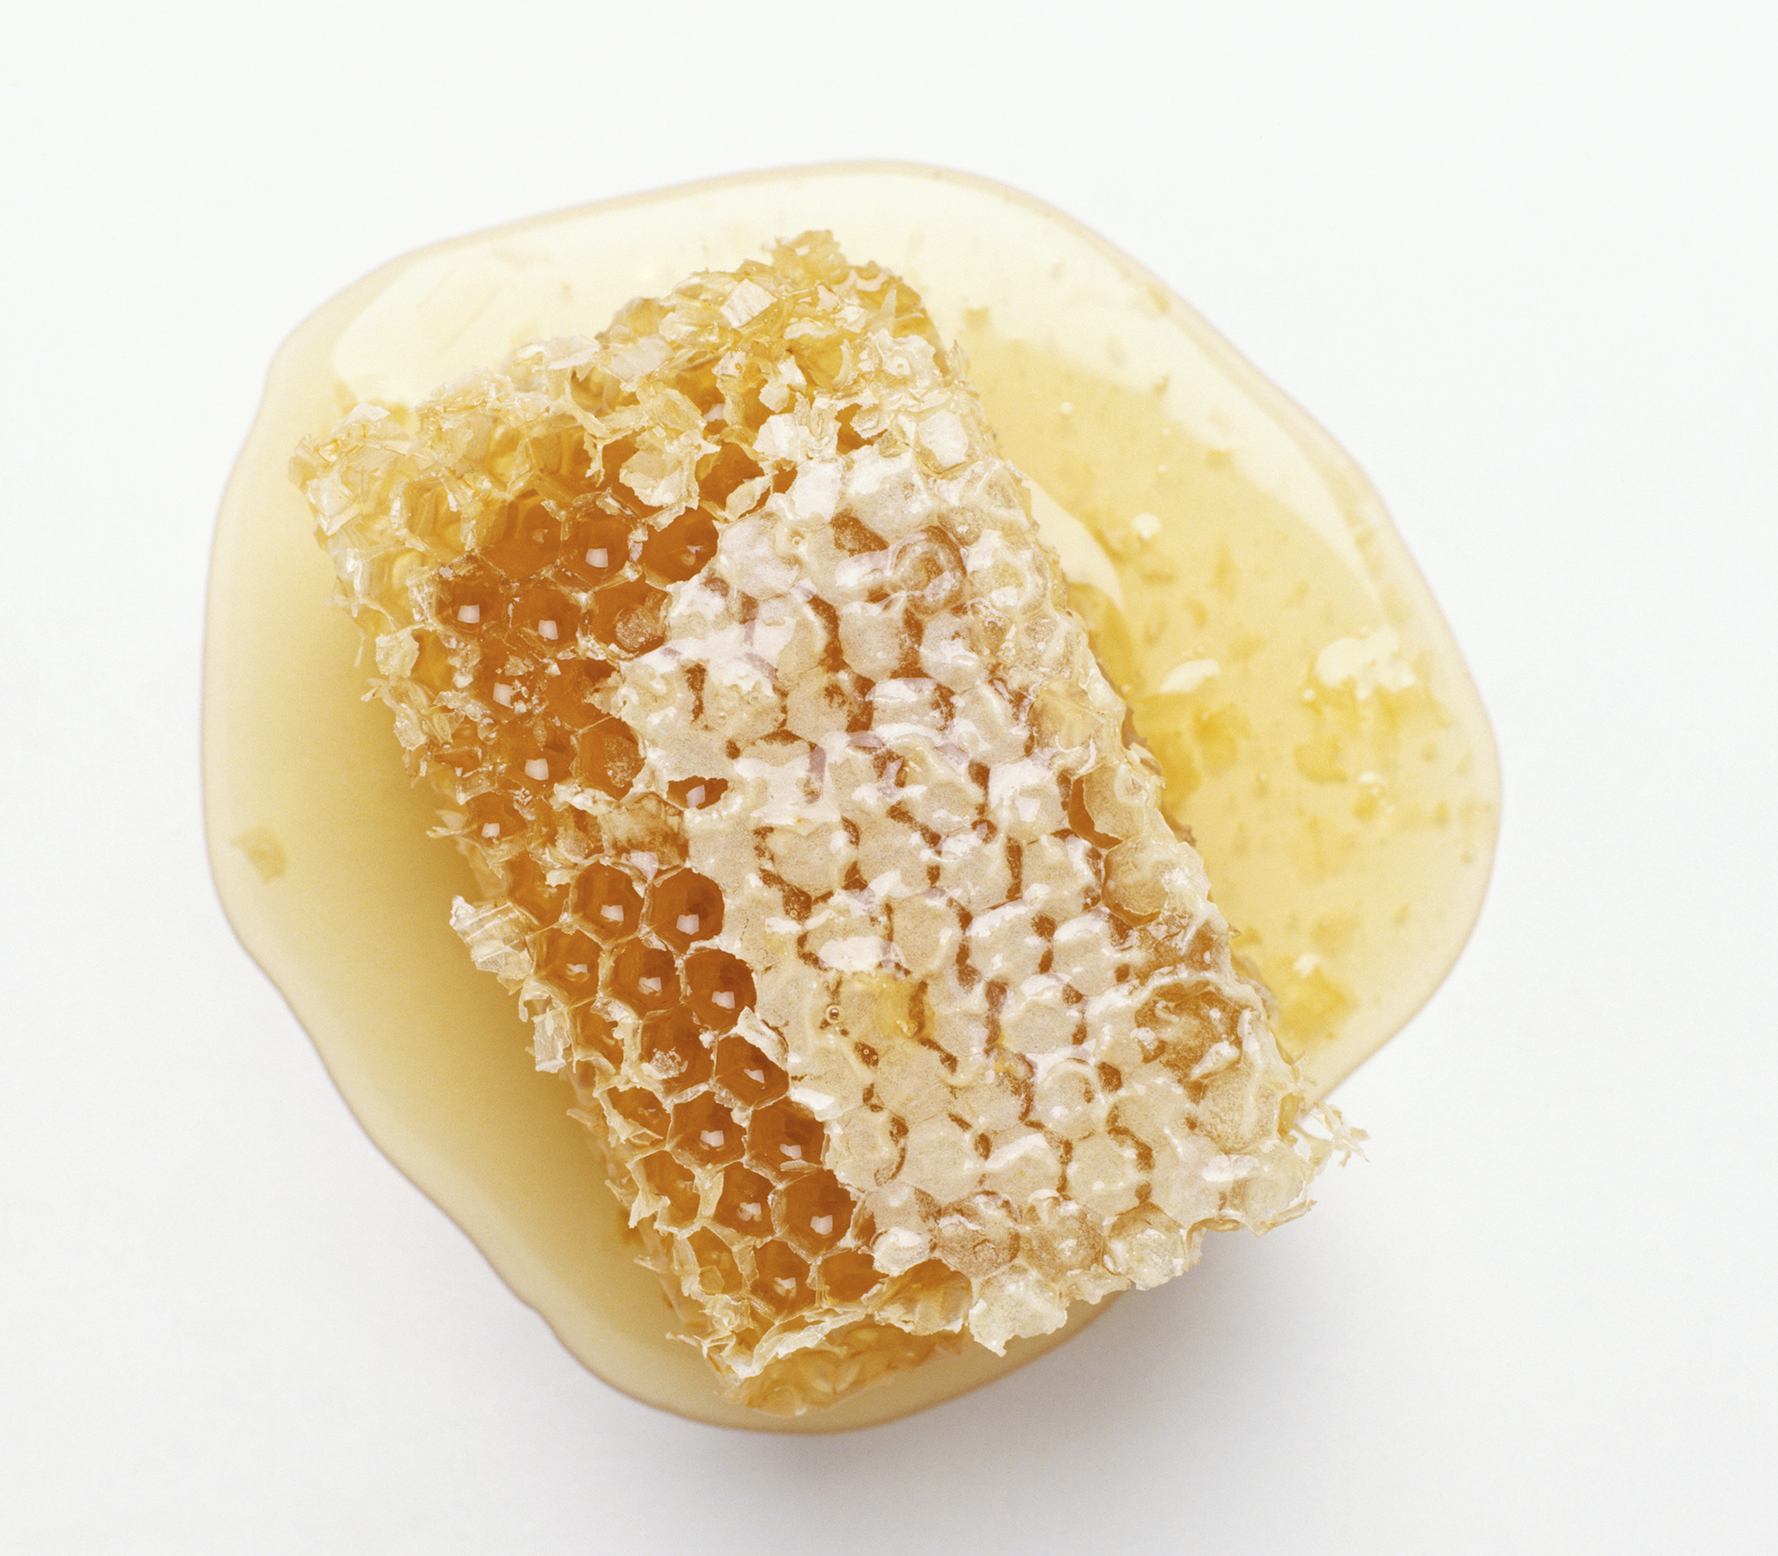 How to remove beeswax from your hair